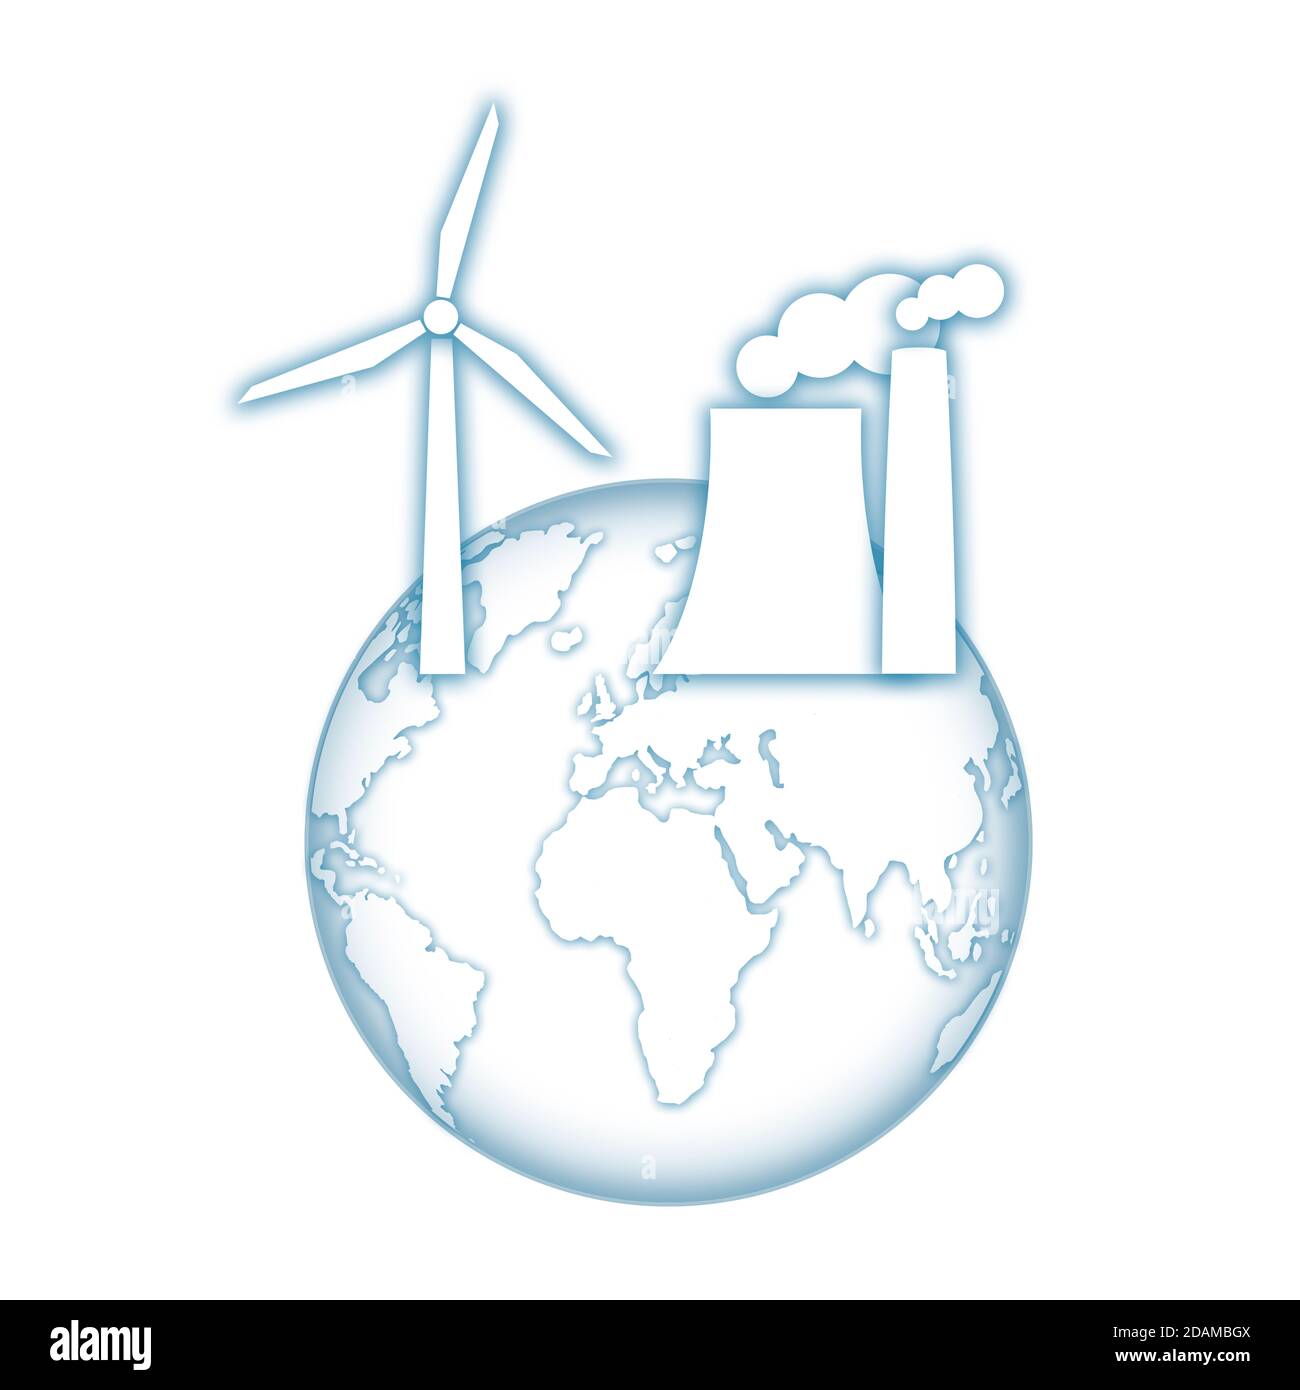 Earth with power station and wind turbine, illustration. Stock Photo